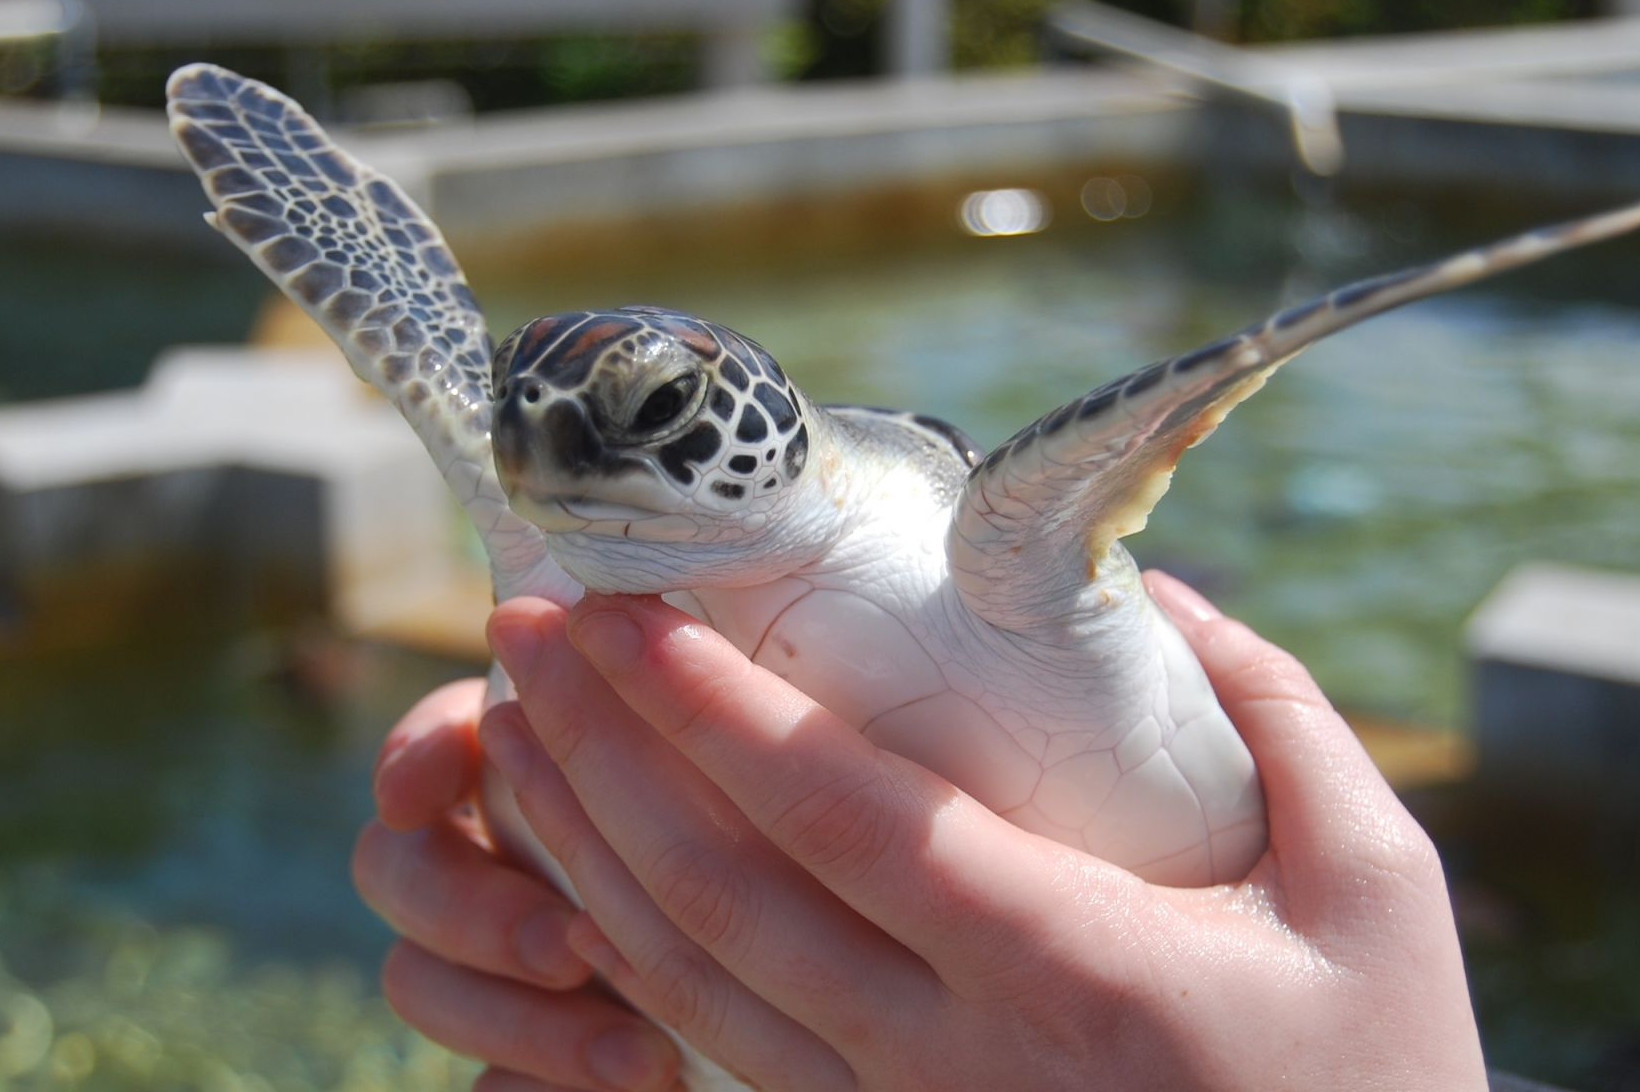 handling turtles can be stressful for the animal